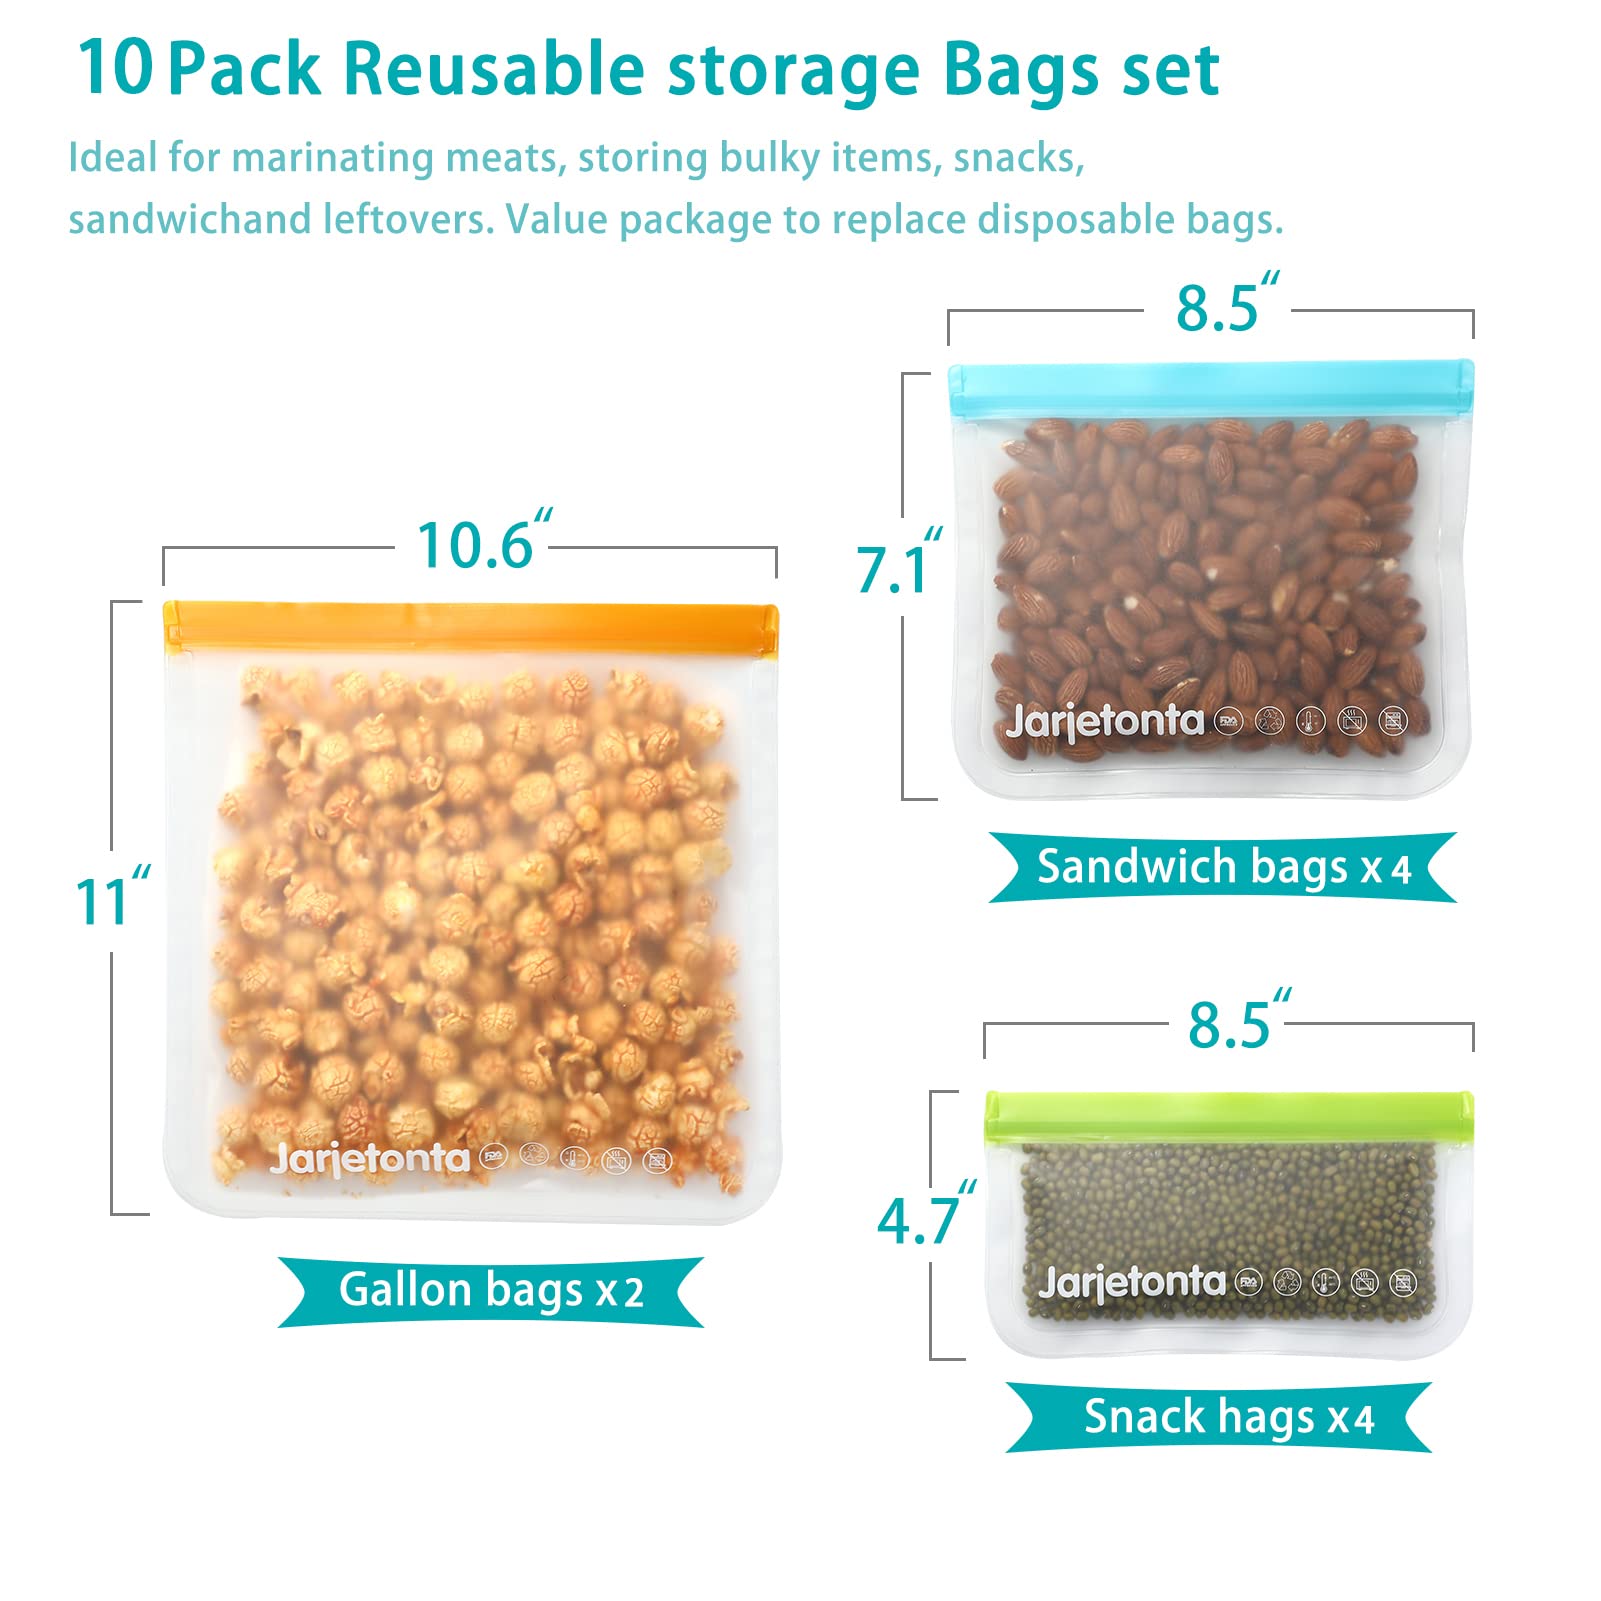 Reusable Storage Bags,10 Pack Reusable Food Container Bags Sets BPA Free Freezer Bags,2 Food Storage Gallon Bags,4 Leakproof Sandwich Bags and 4 Kids Snack Bags,Resealable Silicone for Meat Fruit